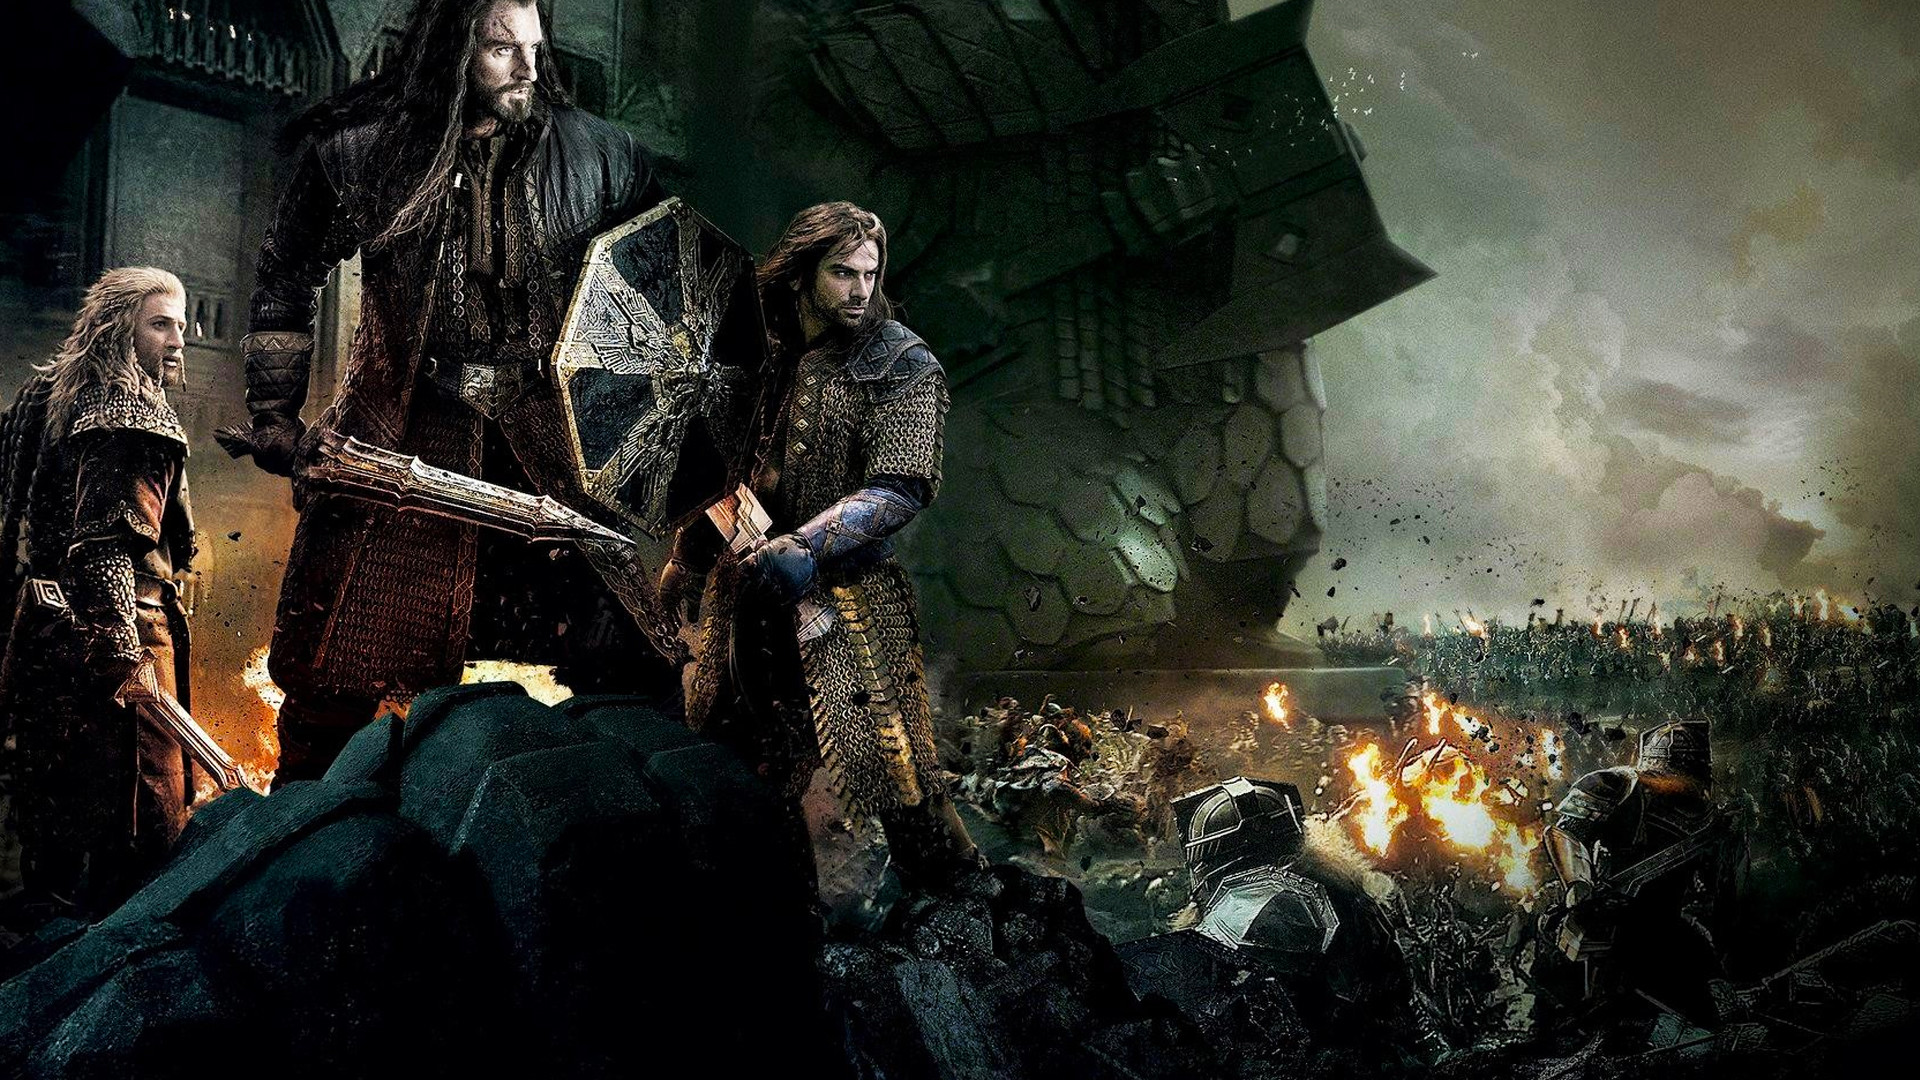 1920x1080 ... The Hobbit: Battle of the Five Armies Wallpaper by sachso74